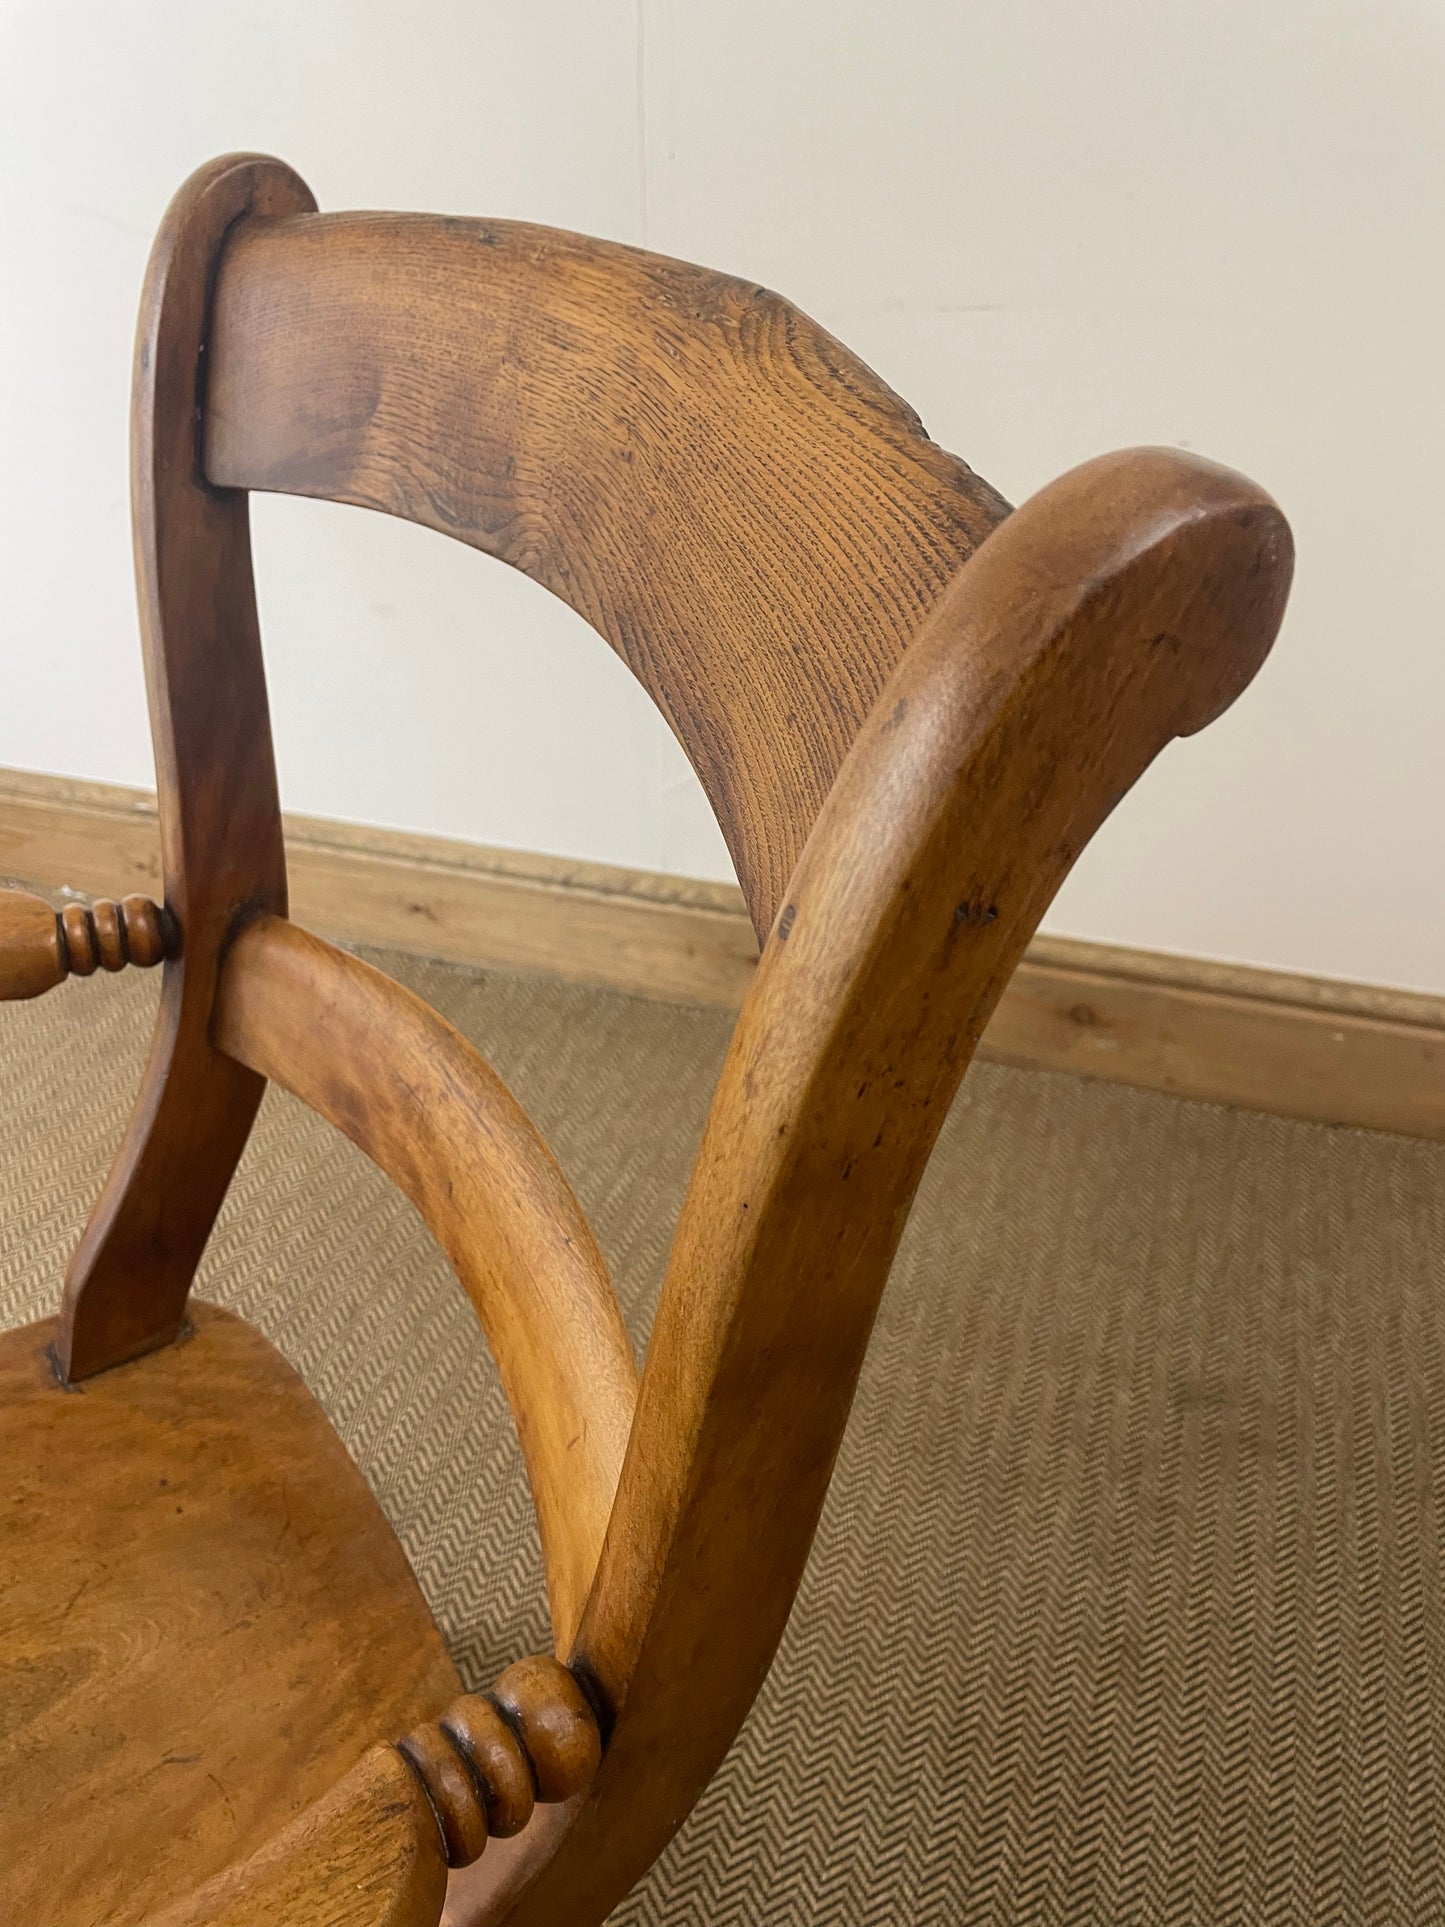 Discover Elegance & Comfort: The Victorian Antique Oxford Fruitwood Arm Chair